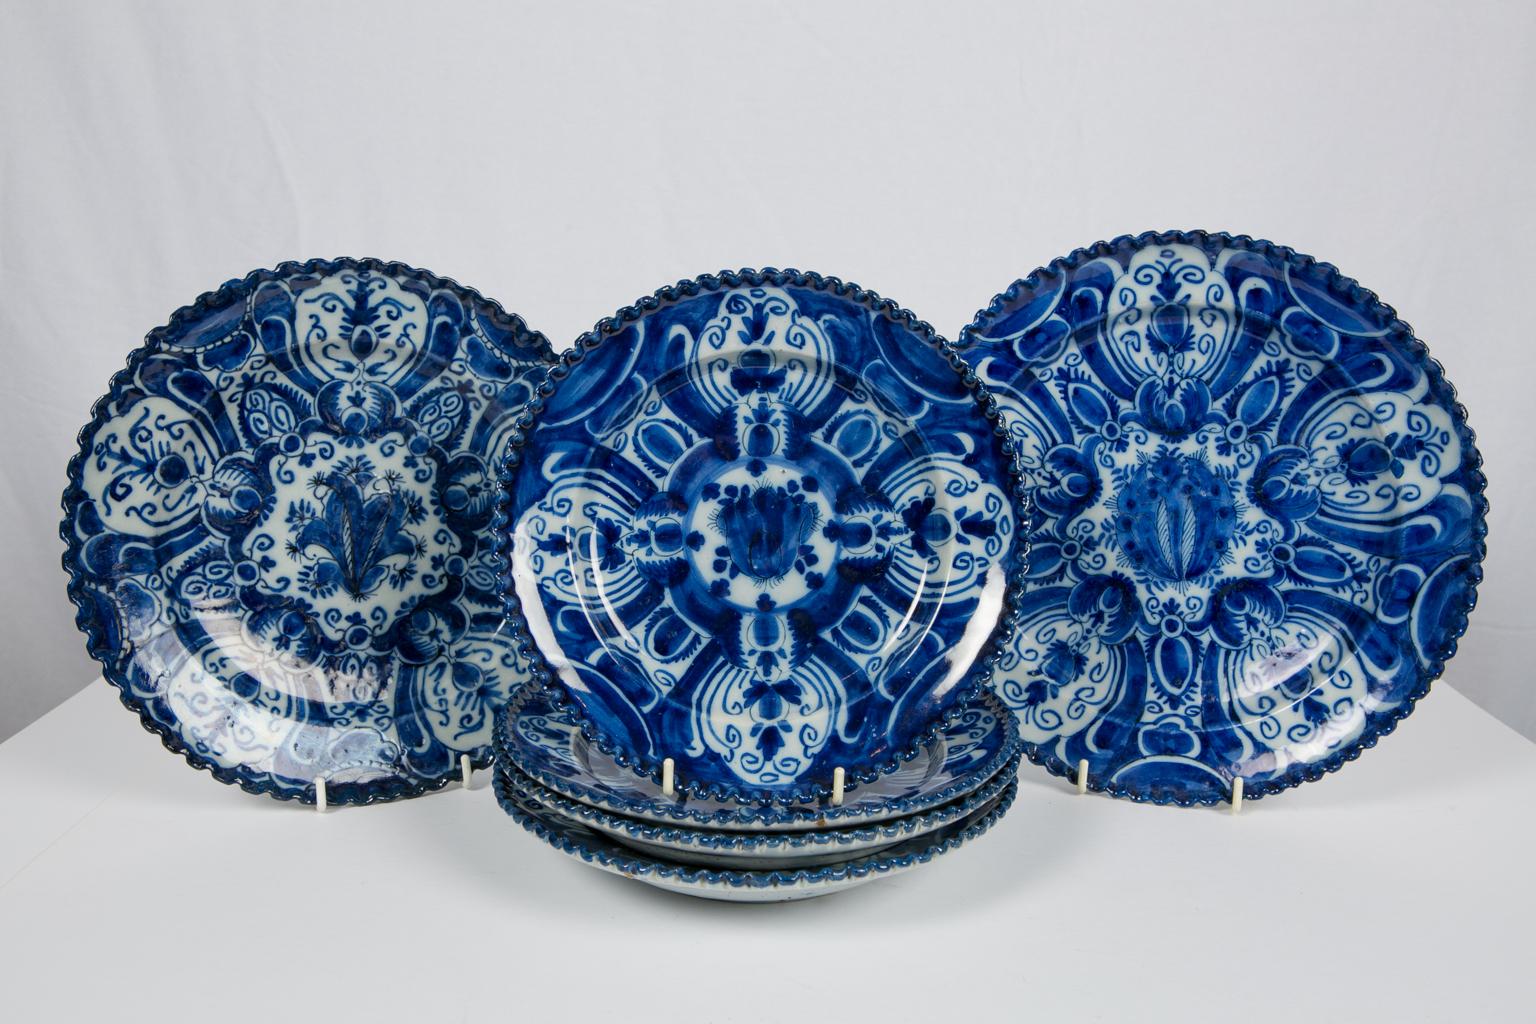 We are pleased to offer these eight antique Blue and White Dutch Delft dishes with a beautiful, intense cobalt blue color.
The pattern is an intricate geometric design of stylized tulips emanating from a central tulip bulb.
The dishes have wonderful